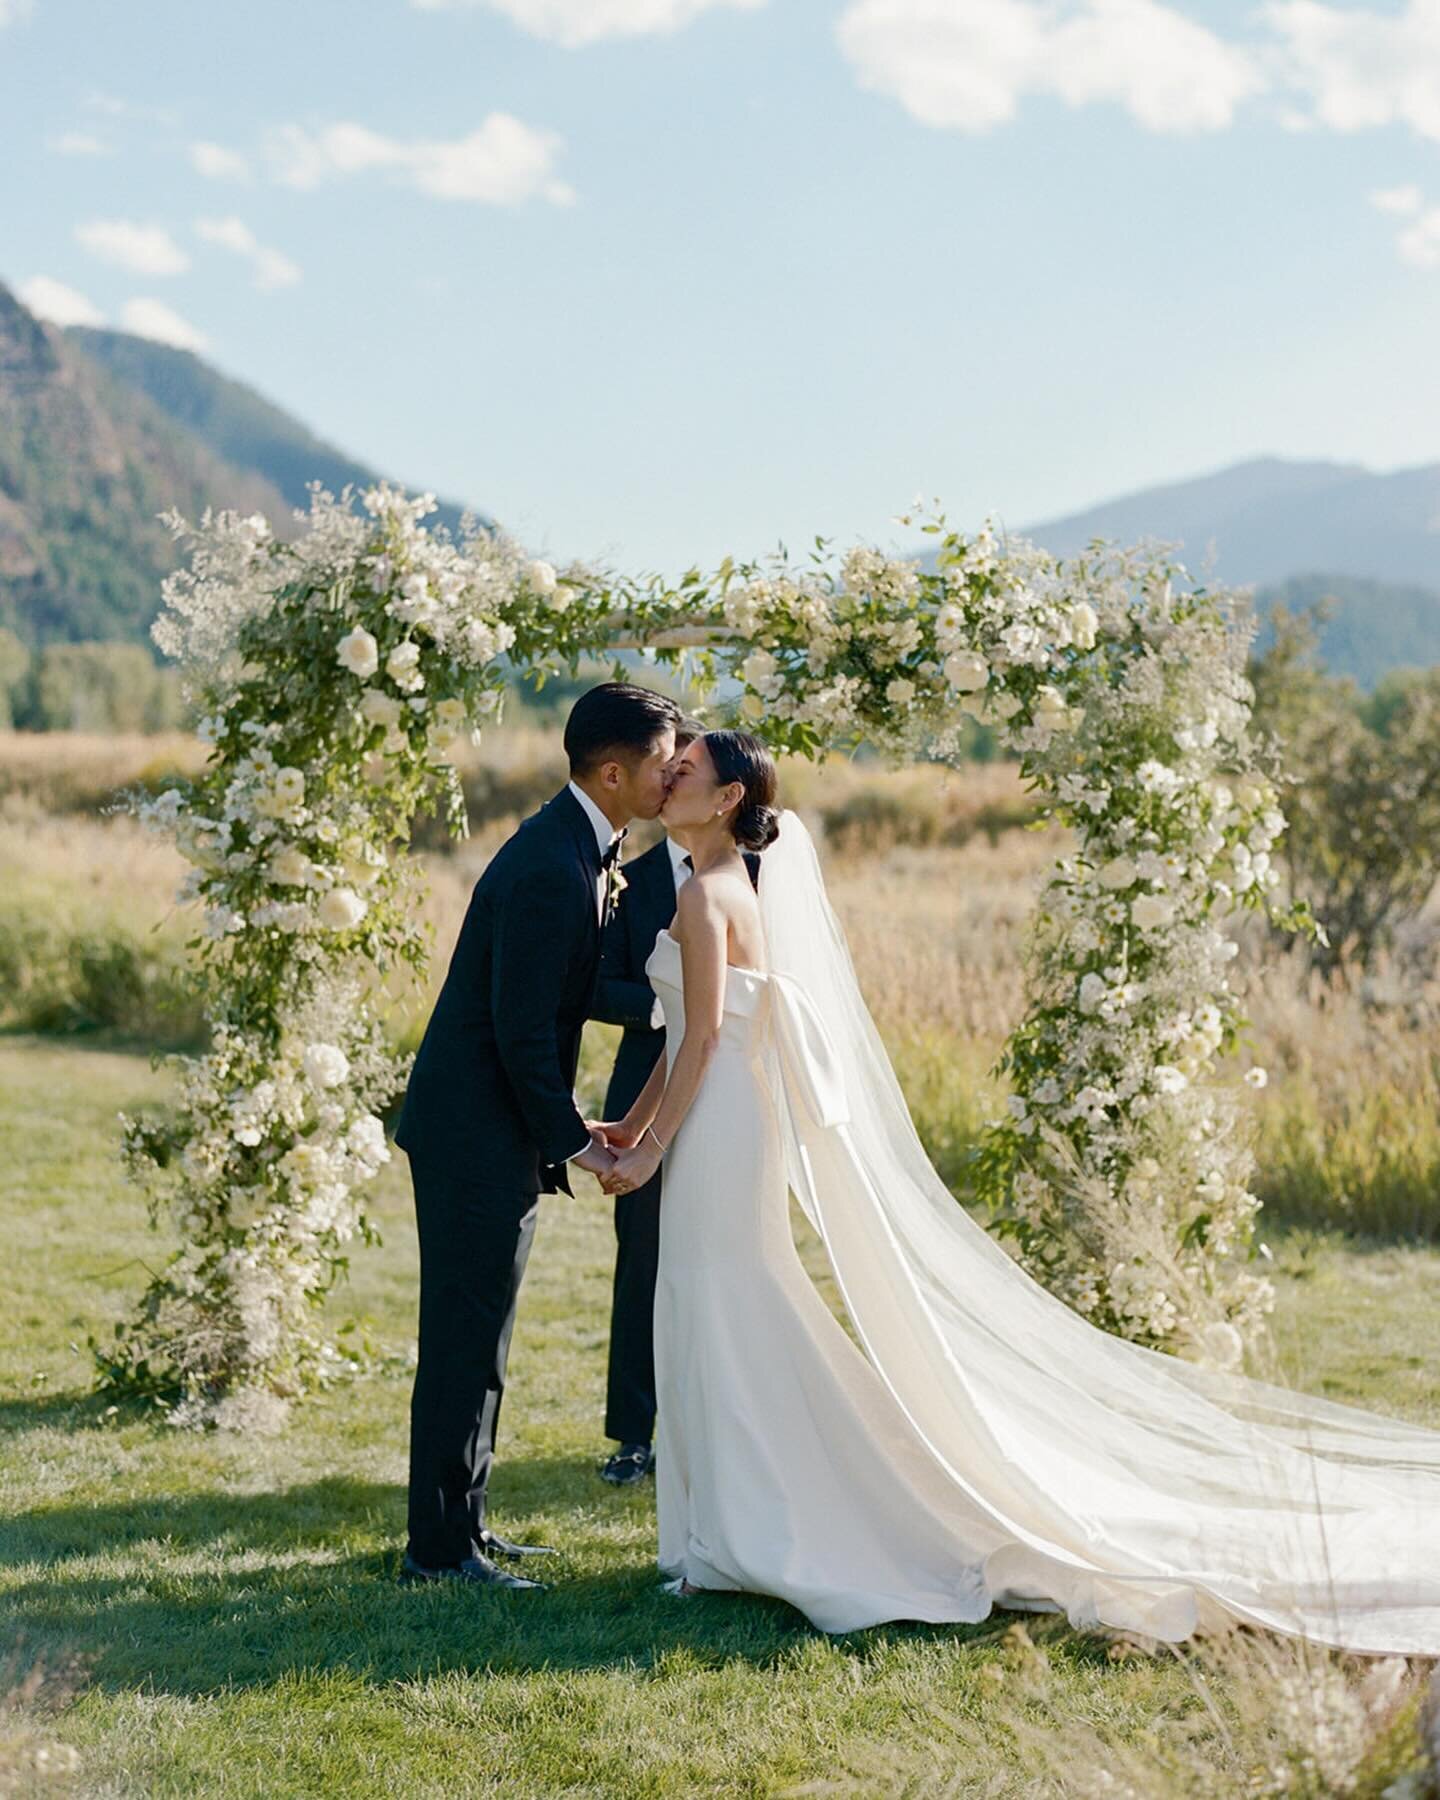 Sometimes you just need to dig through some summer archives ☁️☀️🌿

@jessleighphotographer
@stargazed_weddings_and_events
@littleshopoffloral
@aspenmeadowsresort